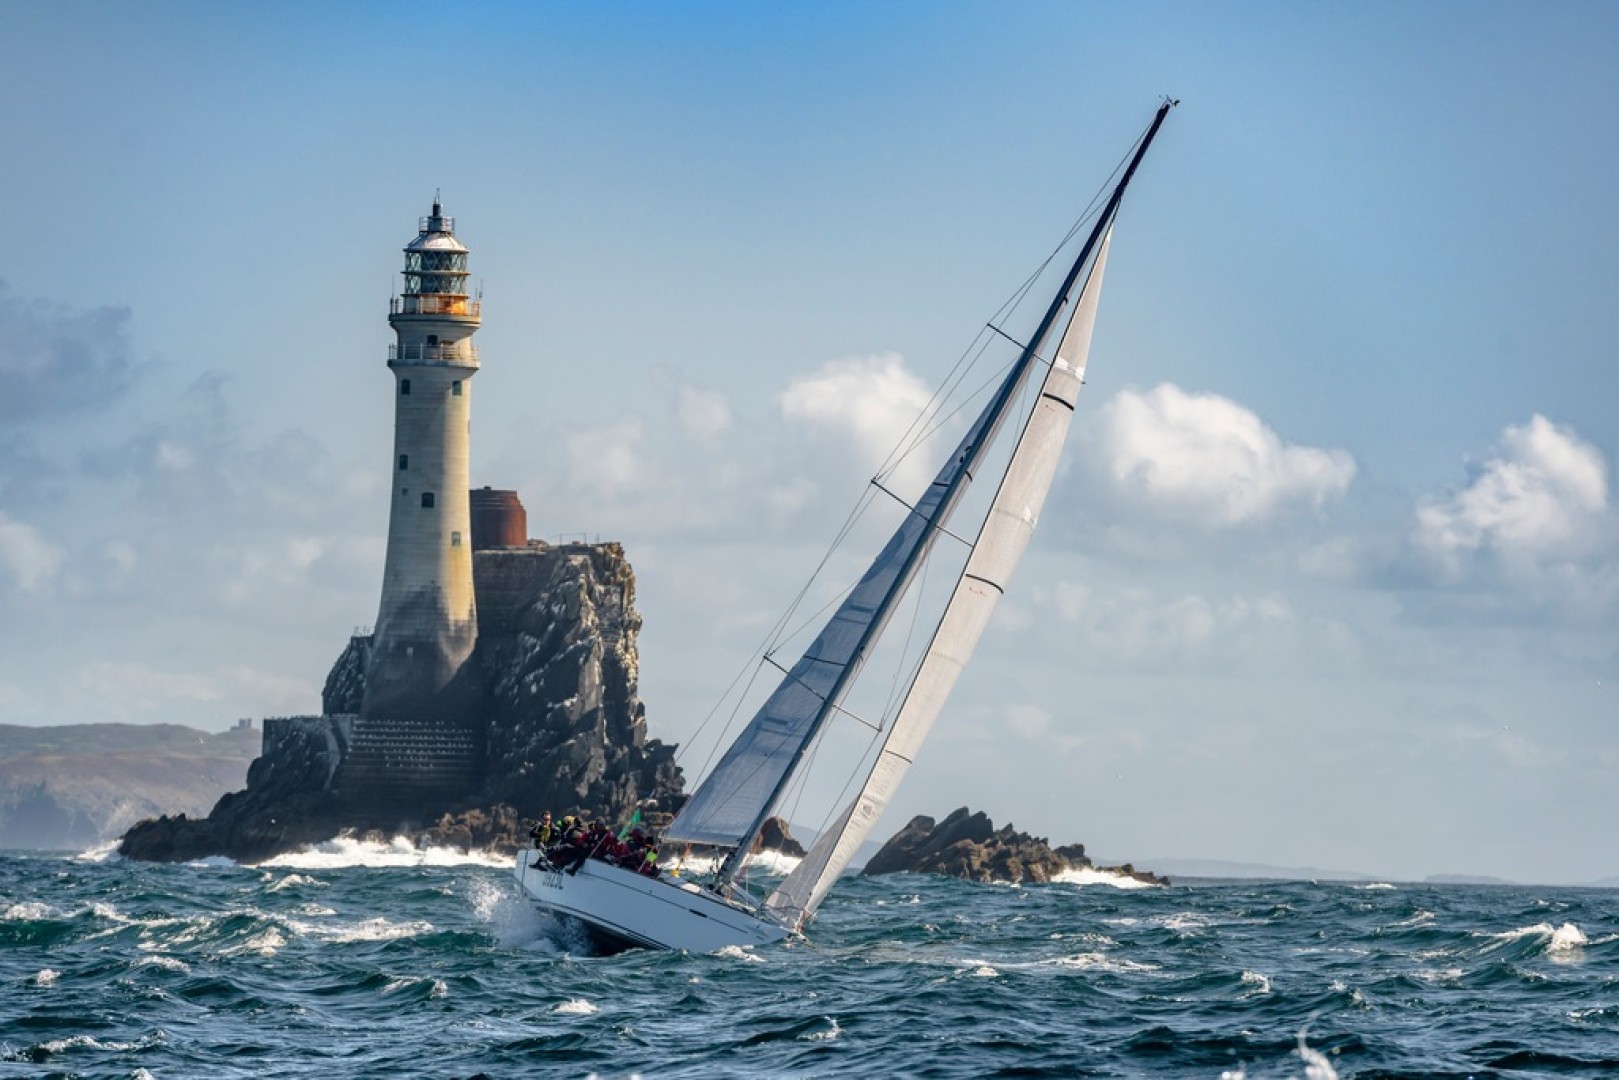 Registration officially opens for the 50th edition of the Rolex Fastnet Race at 1200 UTC on 11th January 2023

© Carlo Borlenghi / Rolex